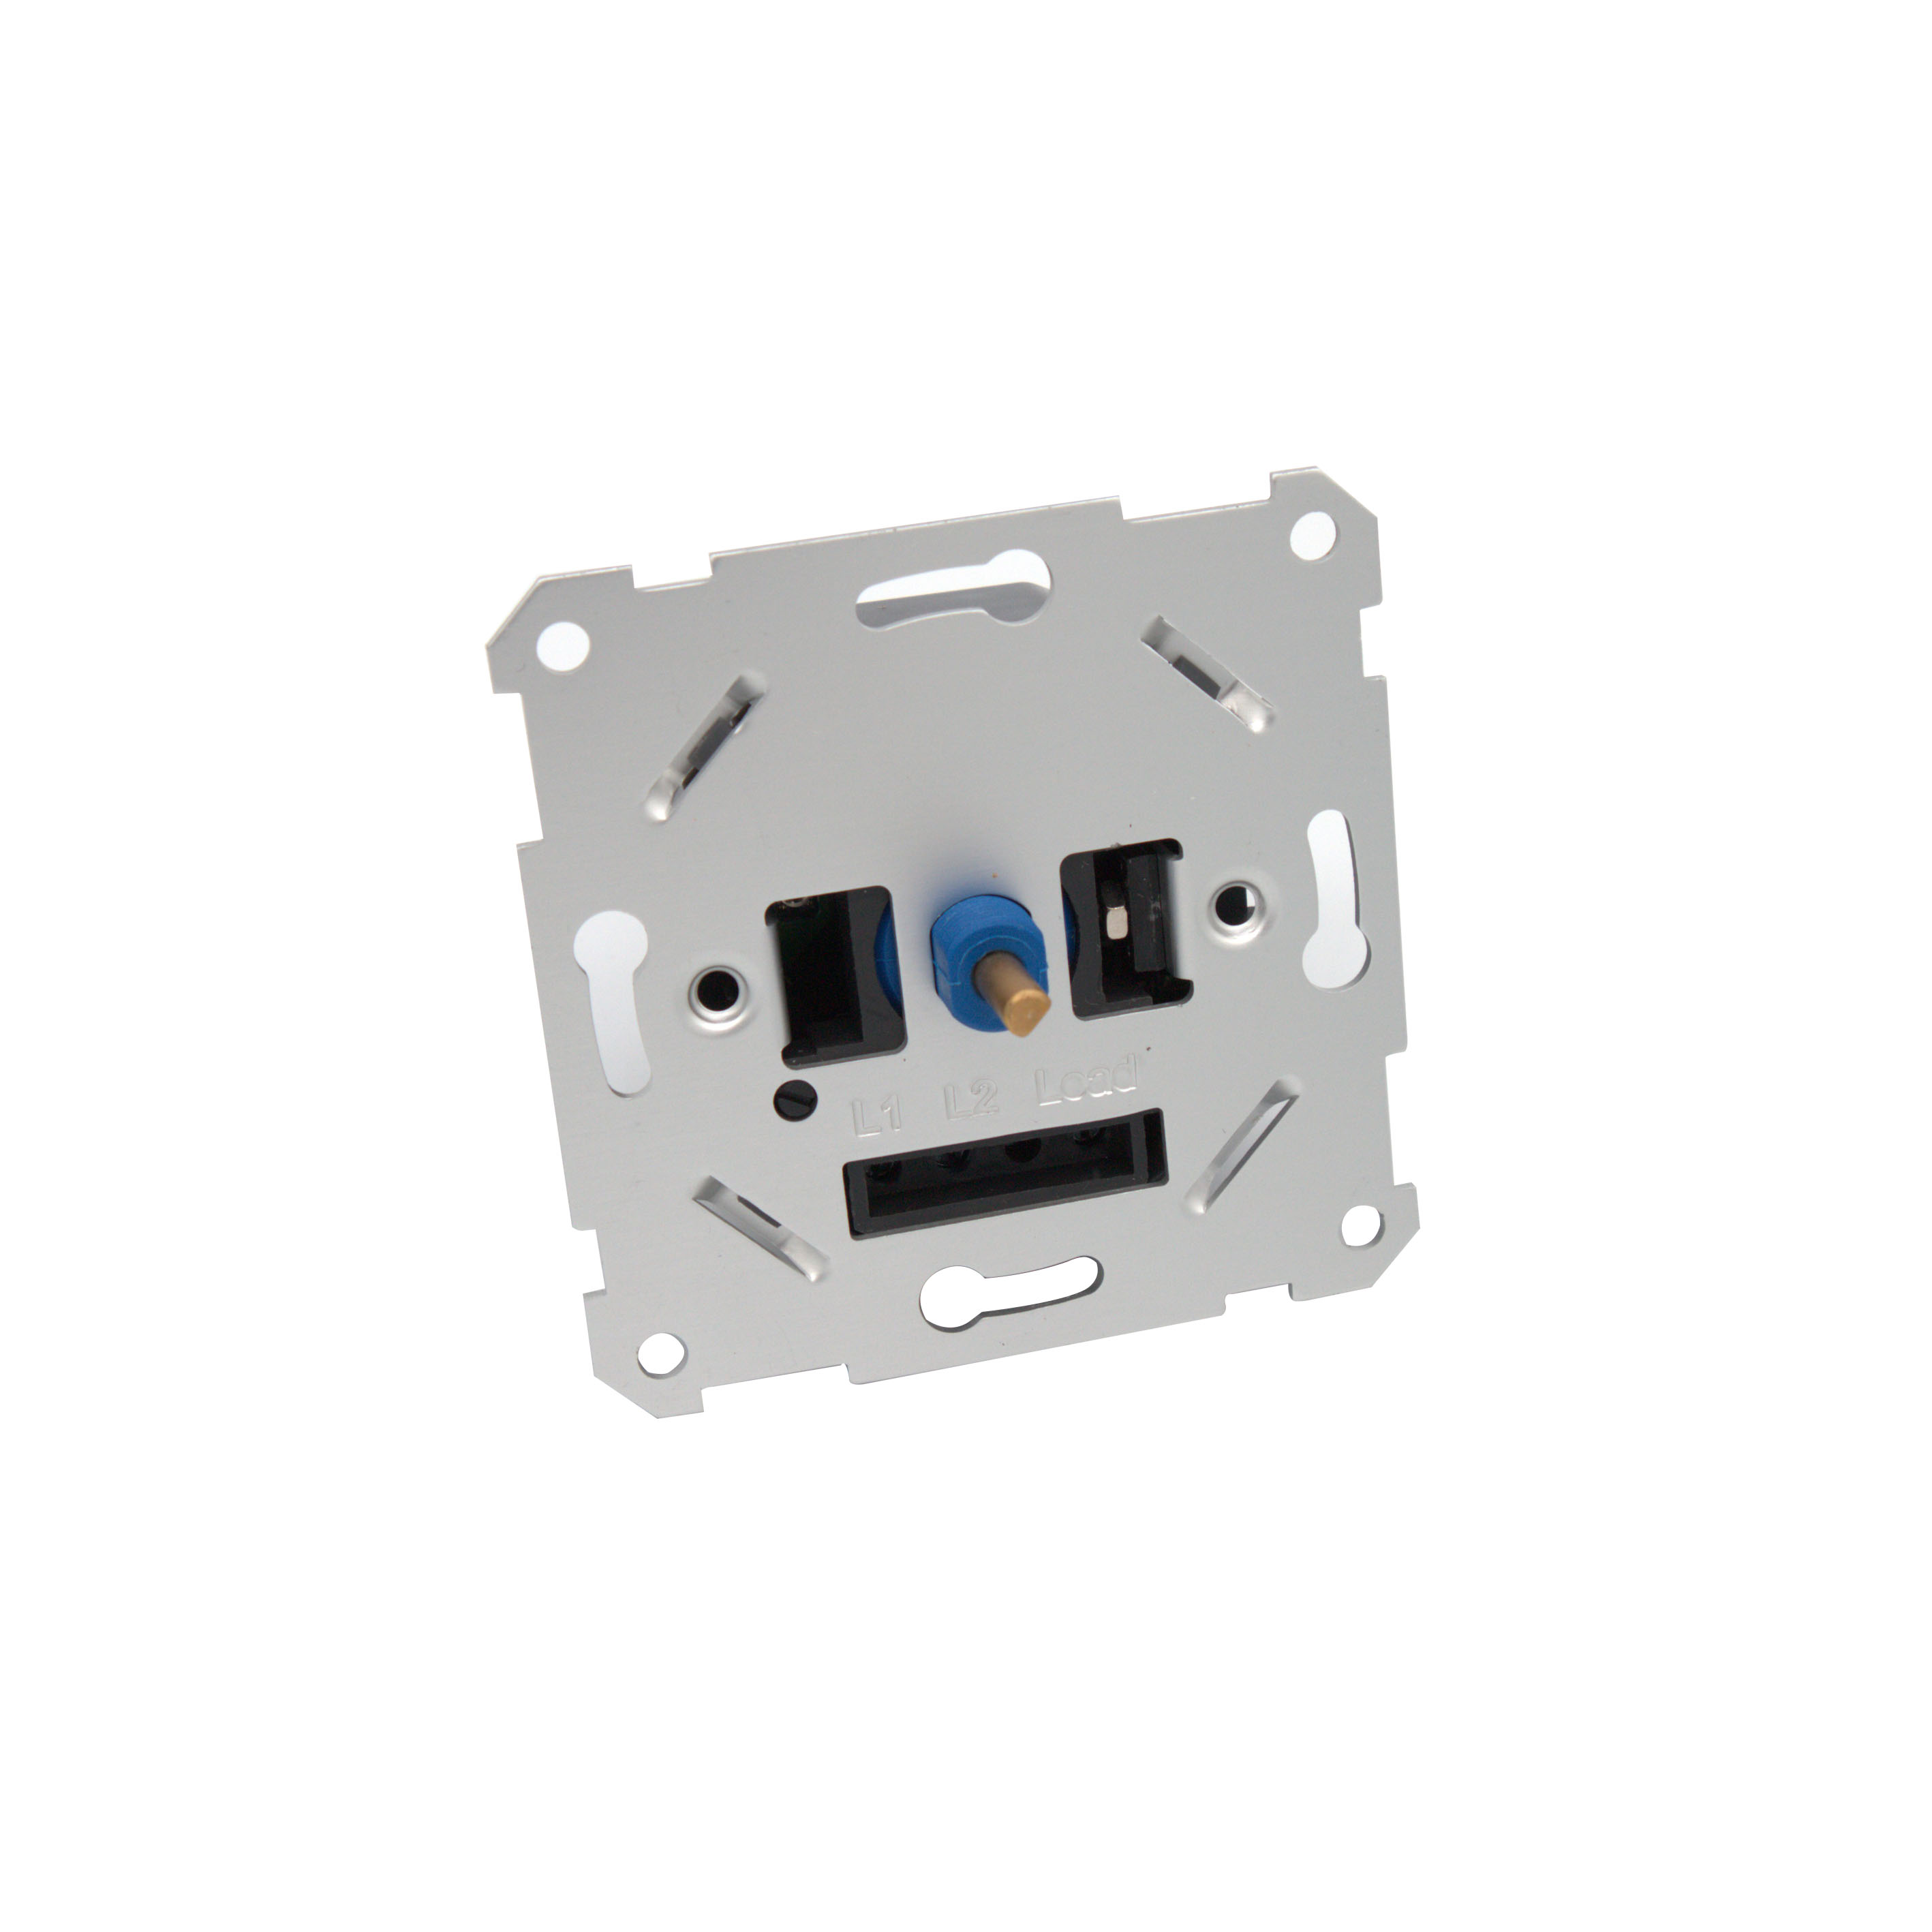 EU Push Rotary LED dimmer switch